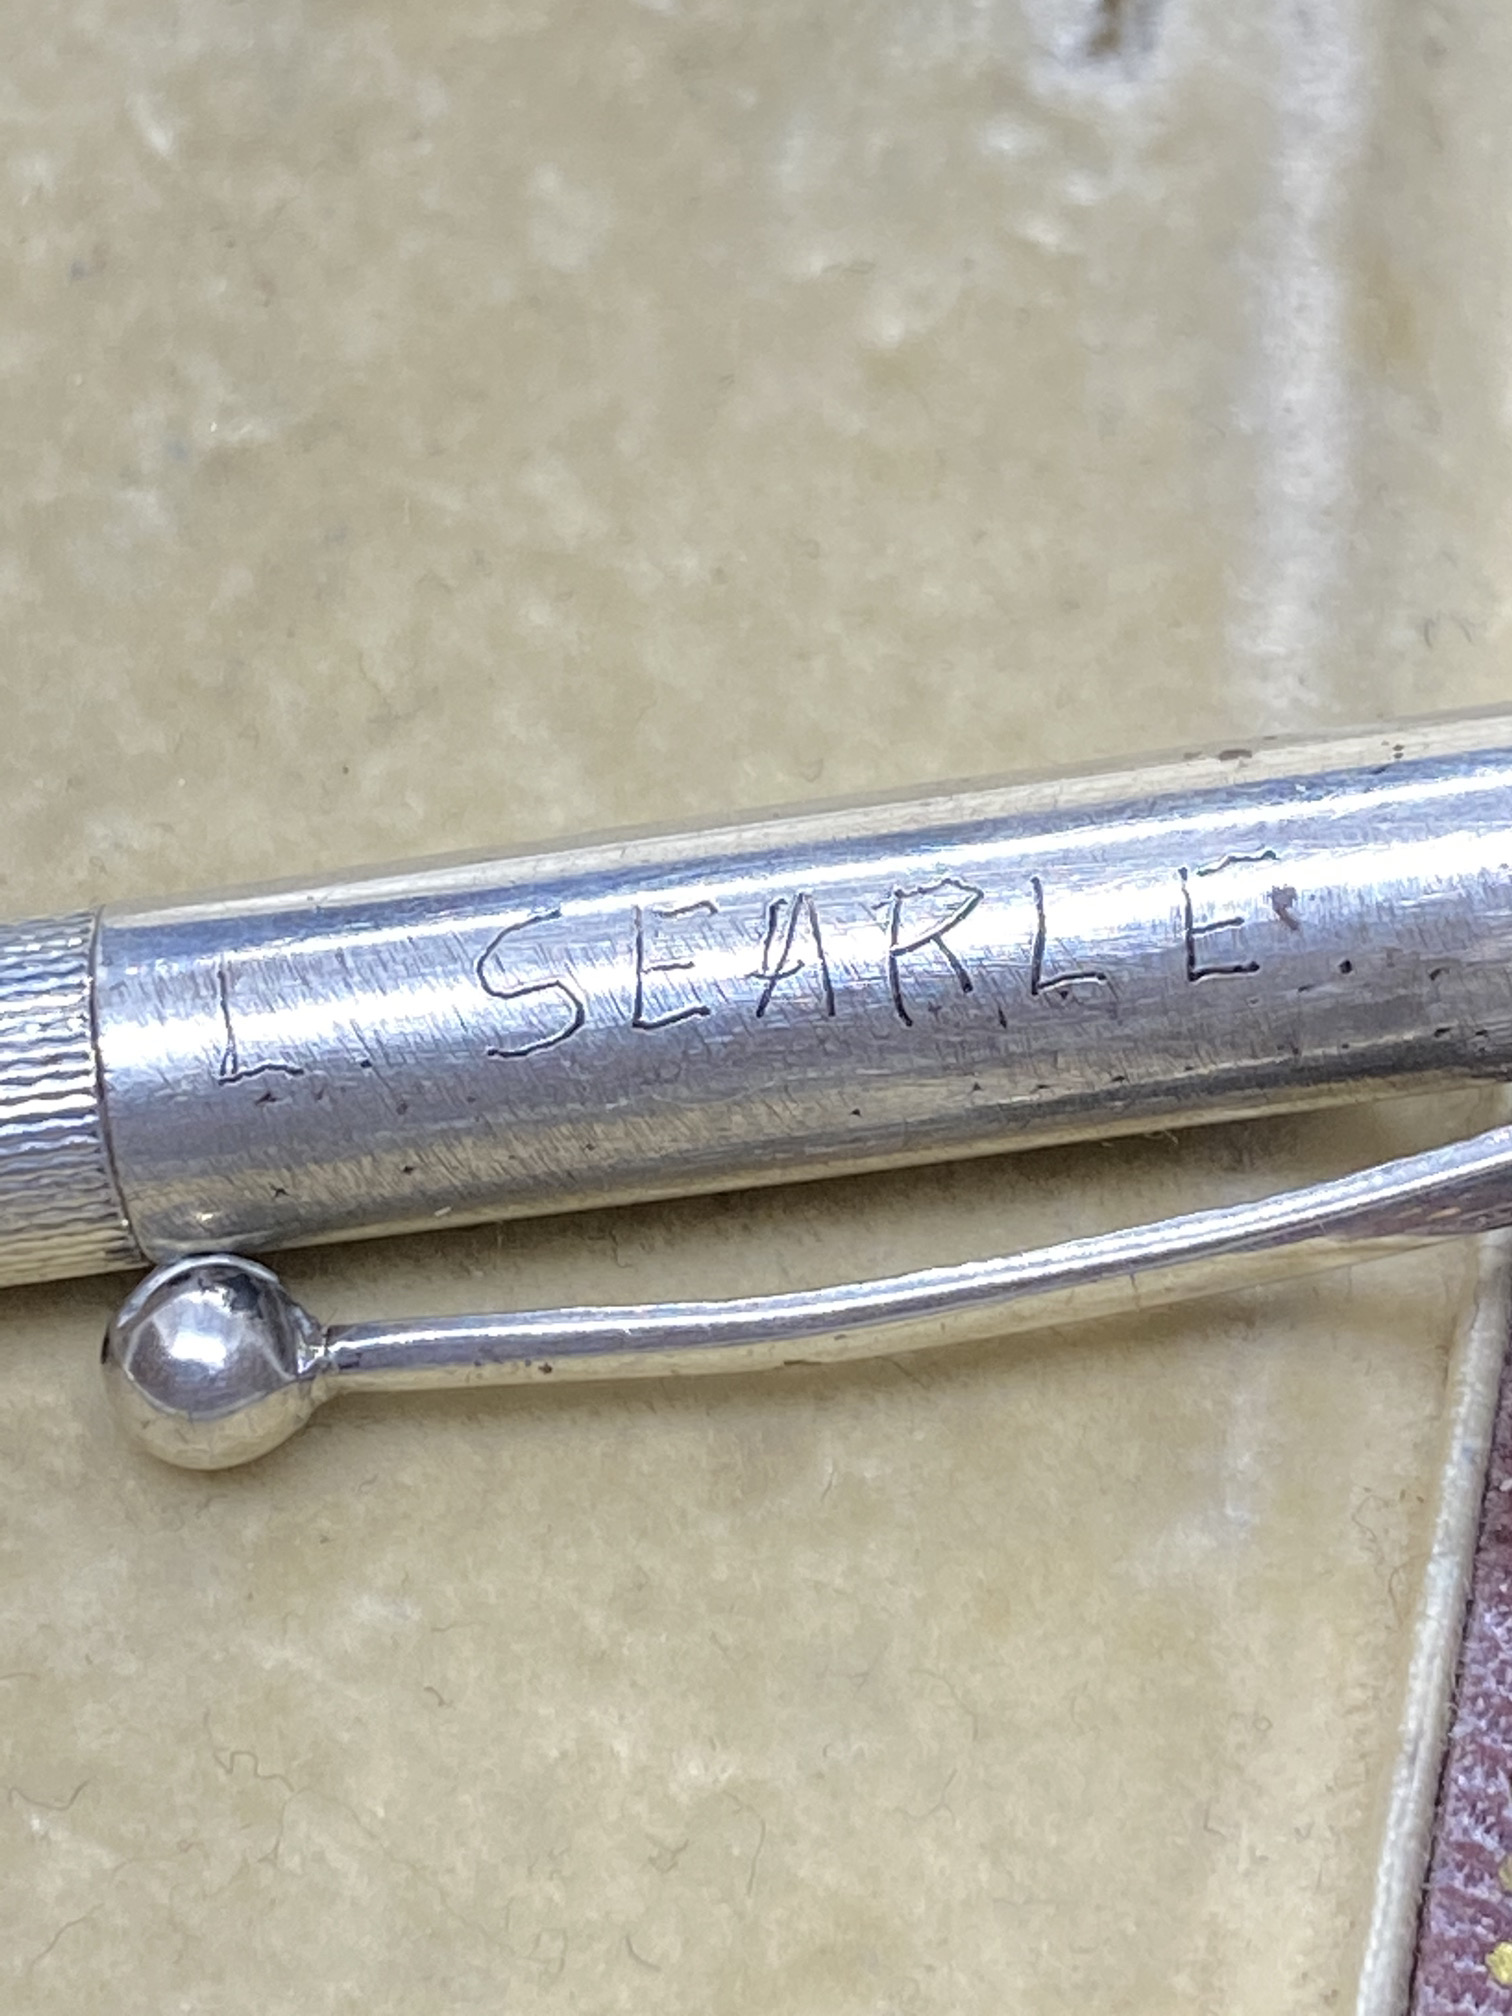 SILVER 925 PROPELLING PENCIL - Image 6 of 6